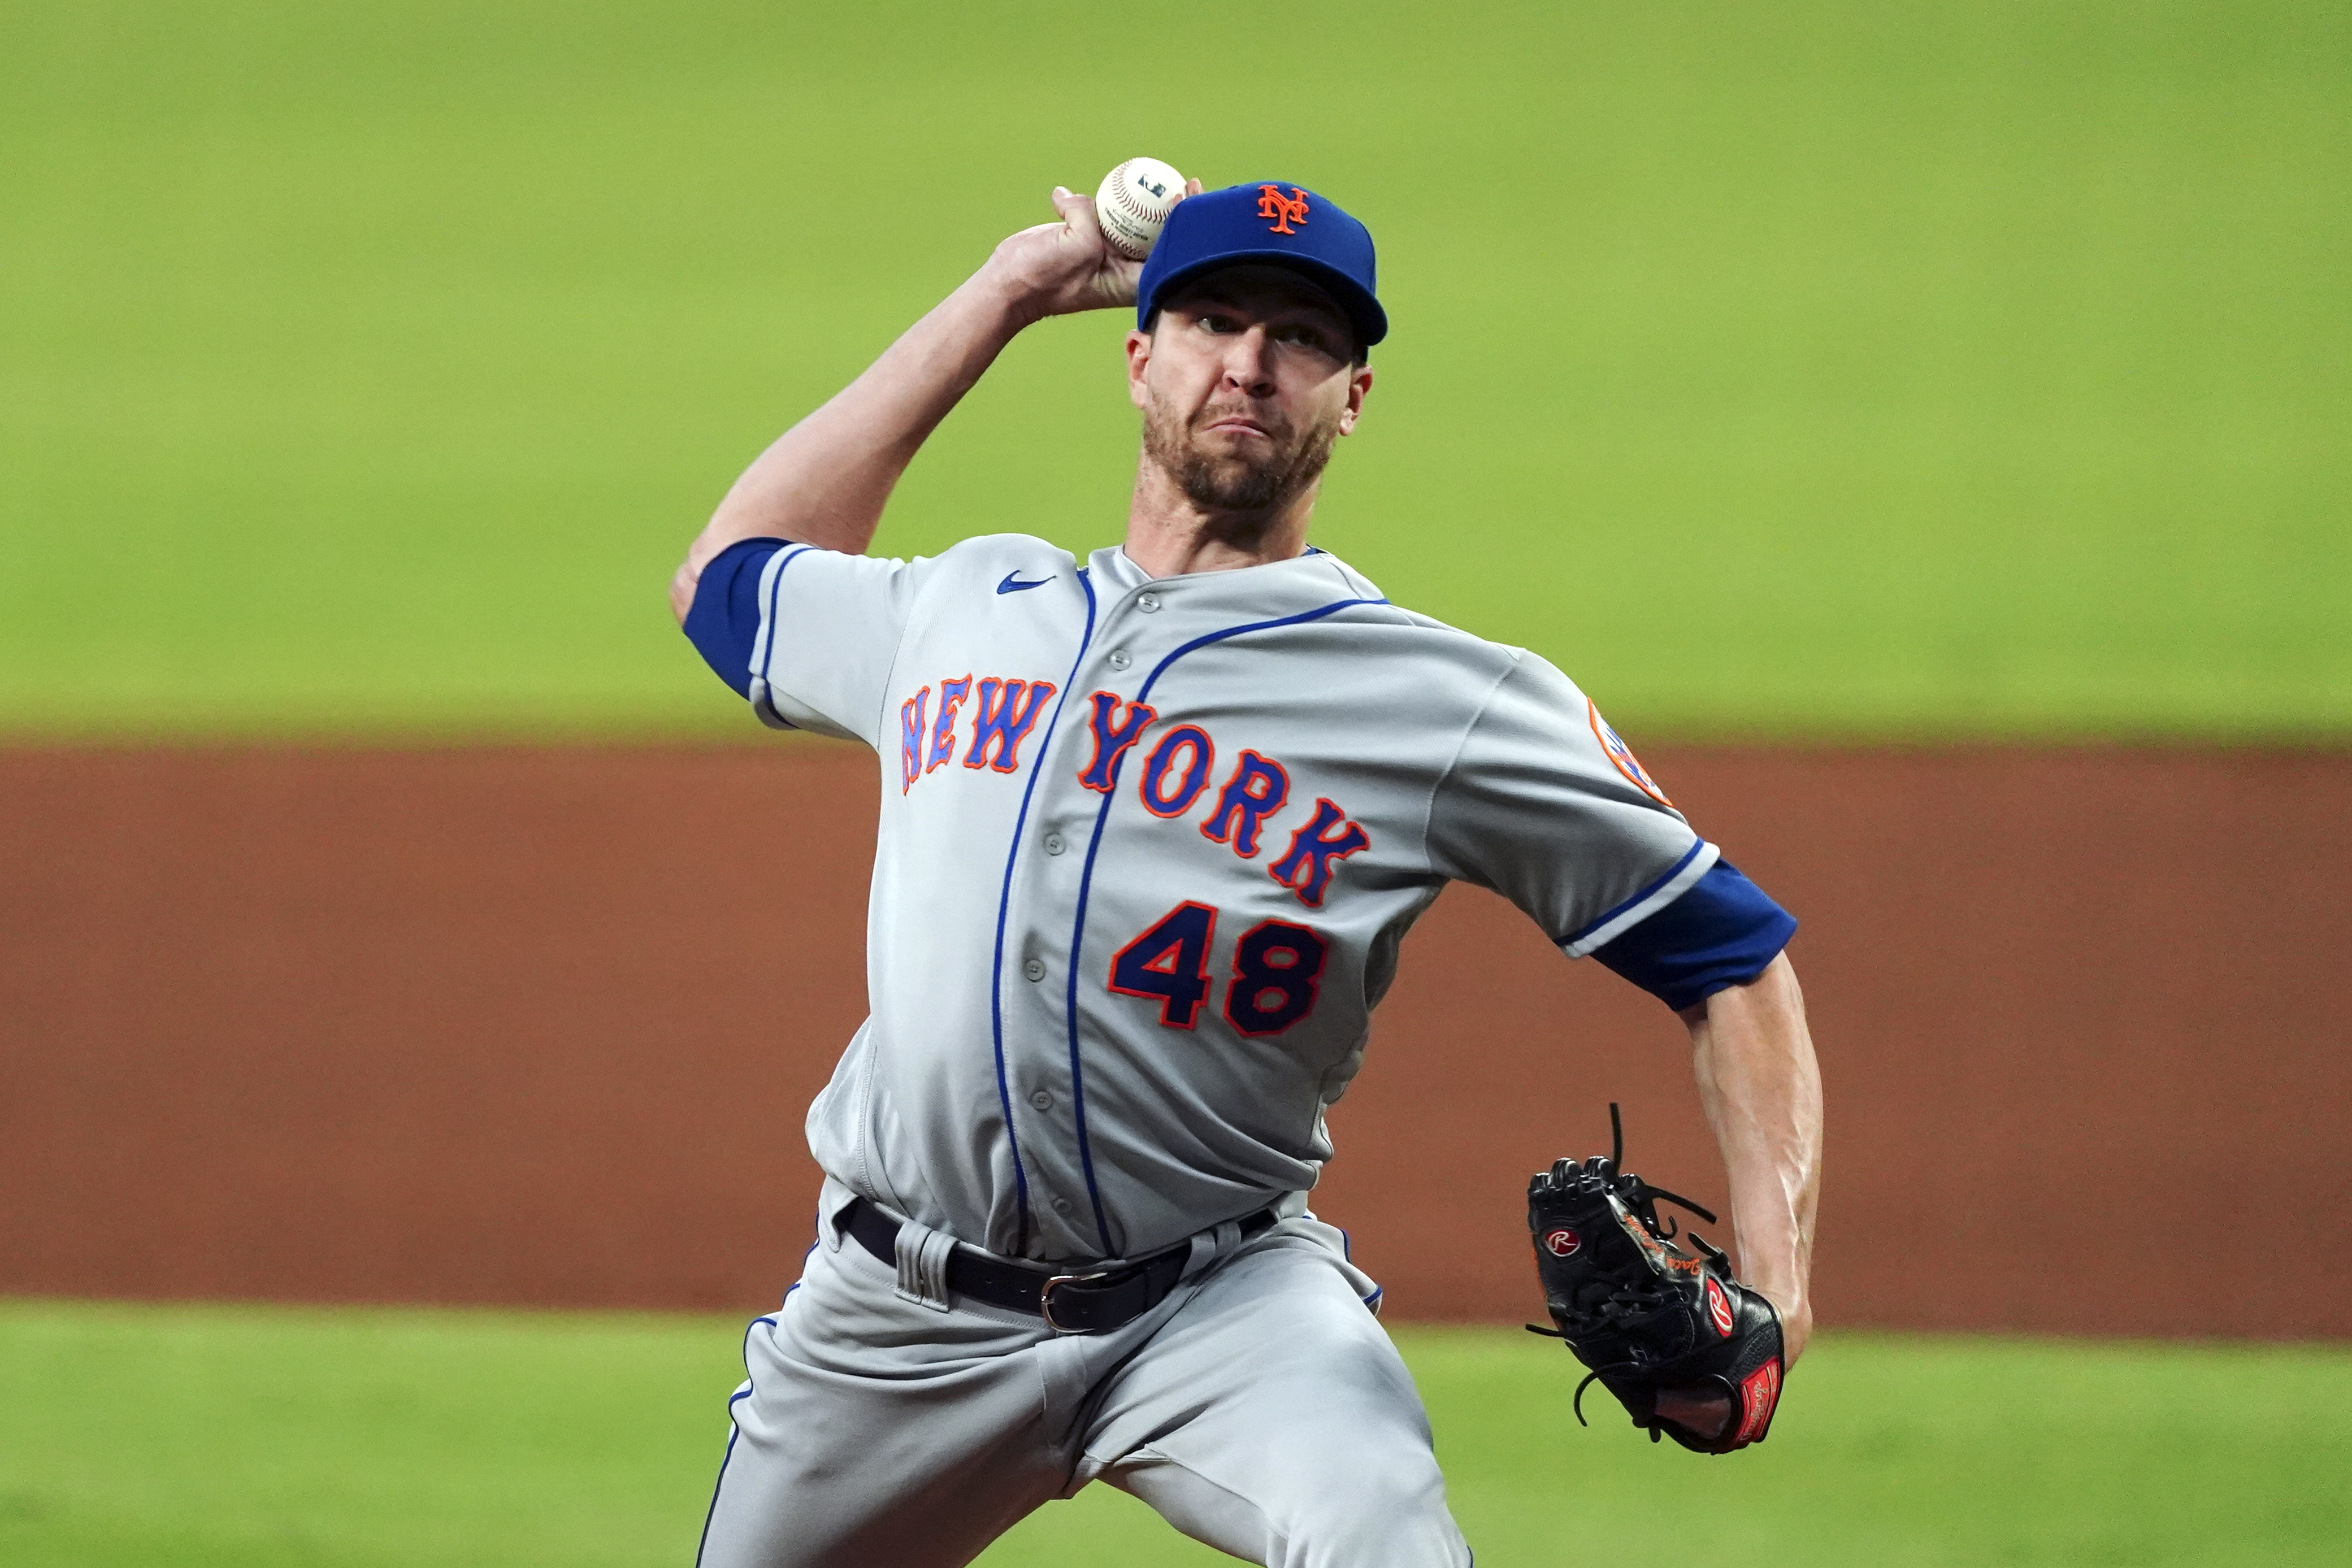 Jacob deGrom is headed for free agency after this Mets season